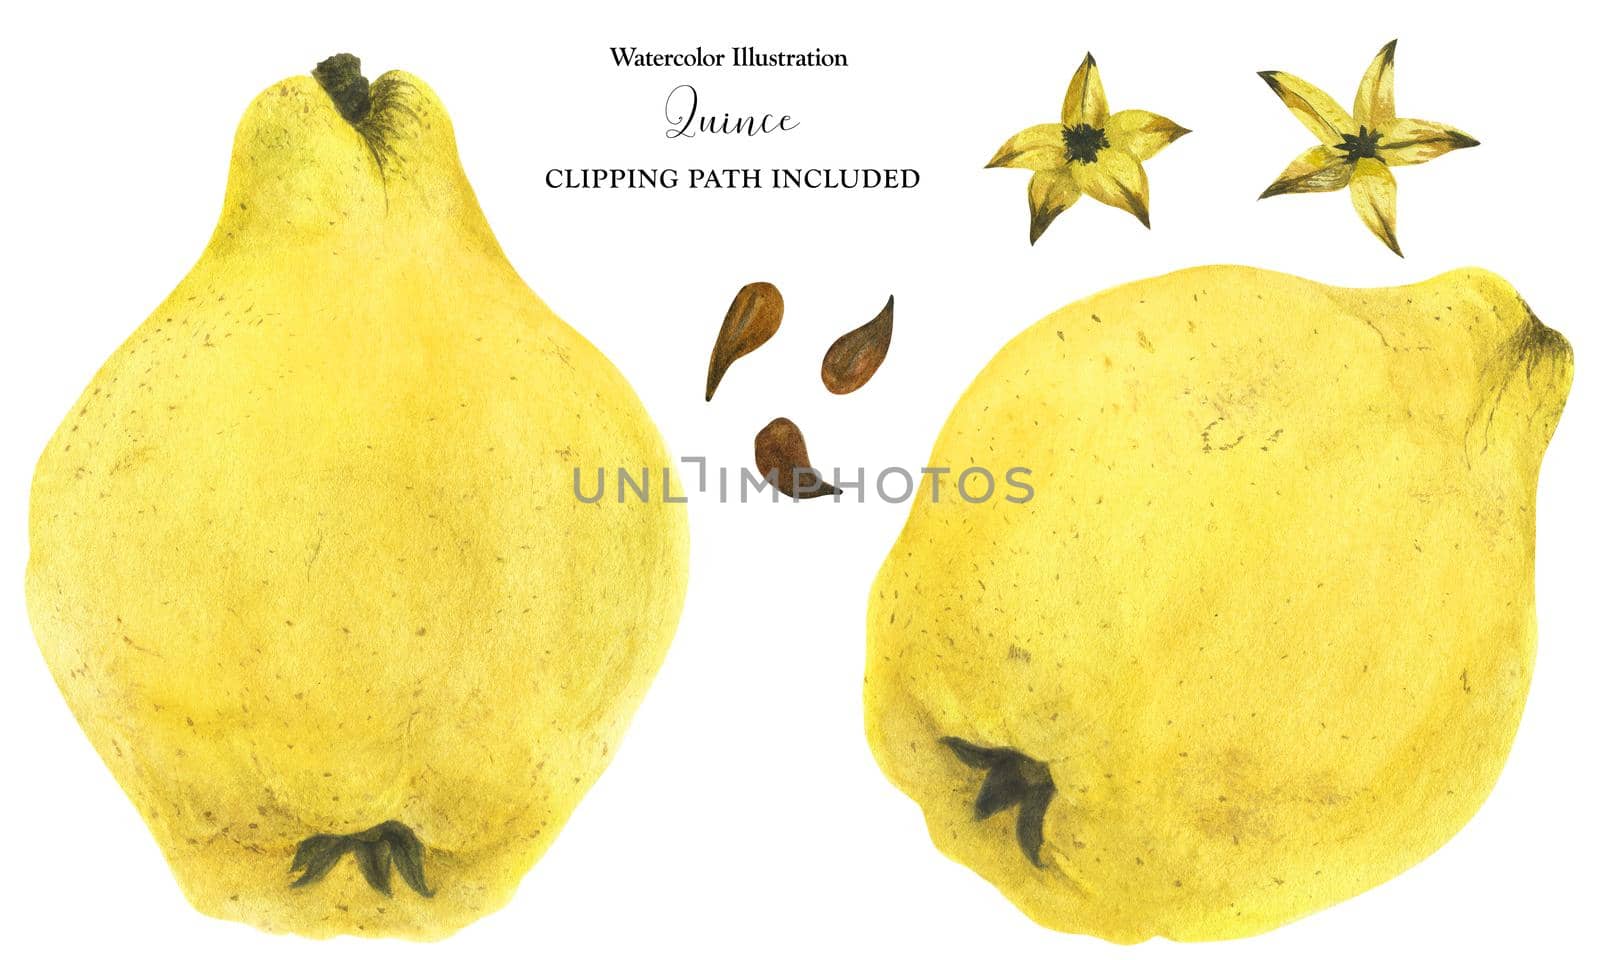 Two fresh yellow quince fruits, watercolor illustration with clipping path